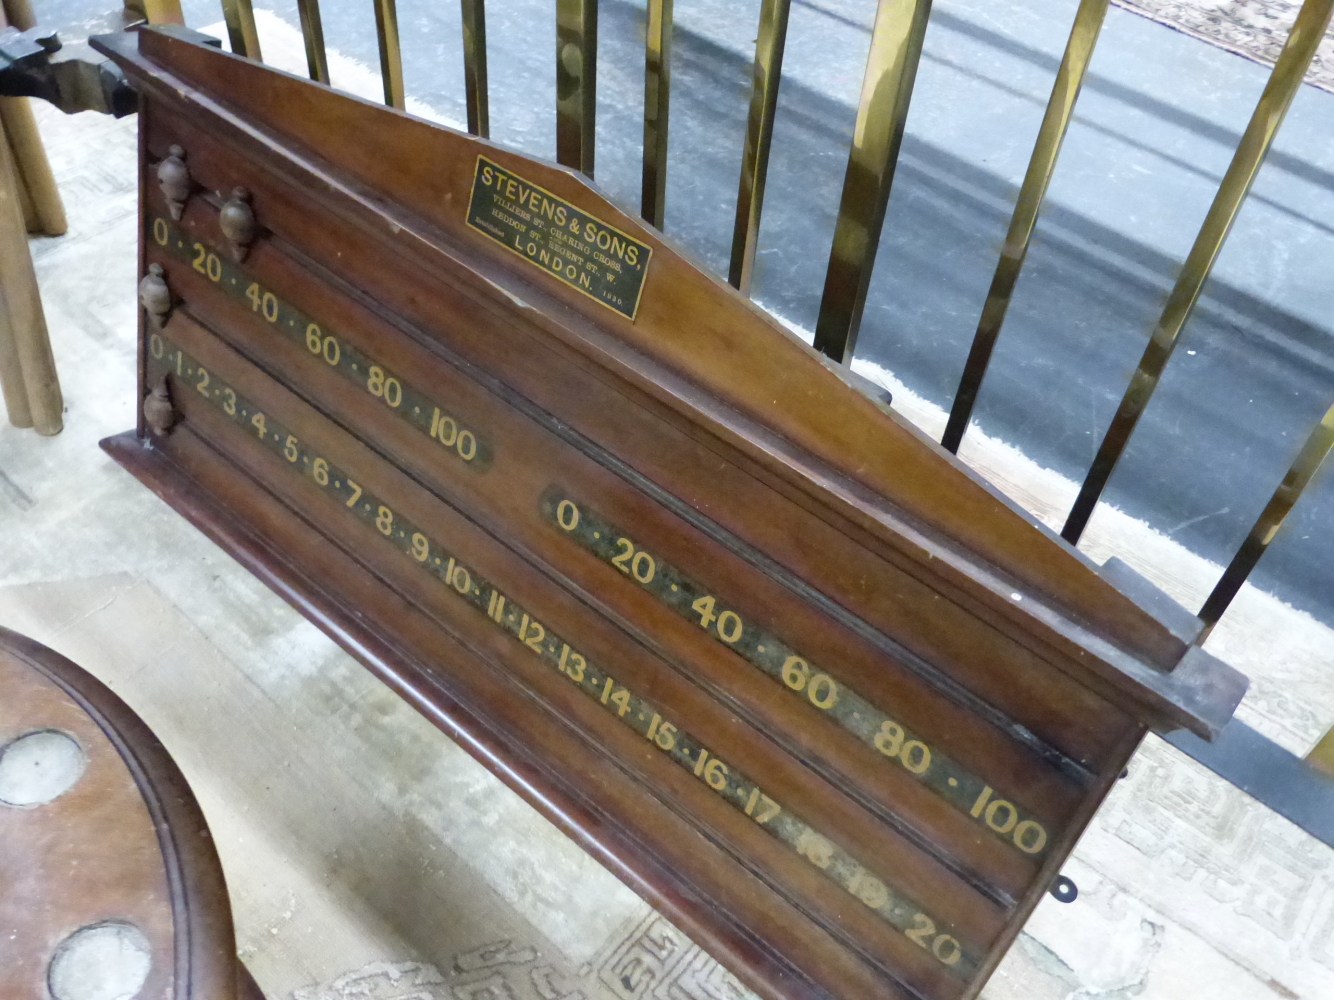 AN ANTIQUE MAHOGANY BILLIARD SCORE BOARD, BY STEVENS AND SONS, 50 x 98cms - Image 7 of 14